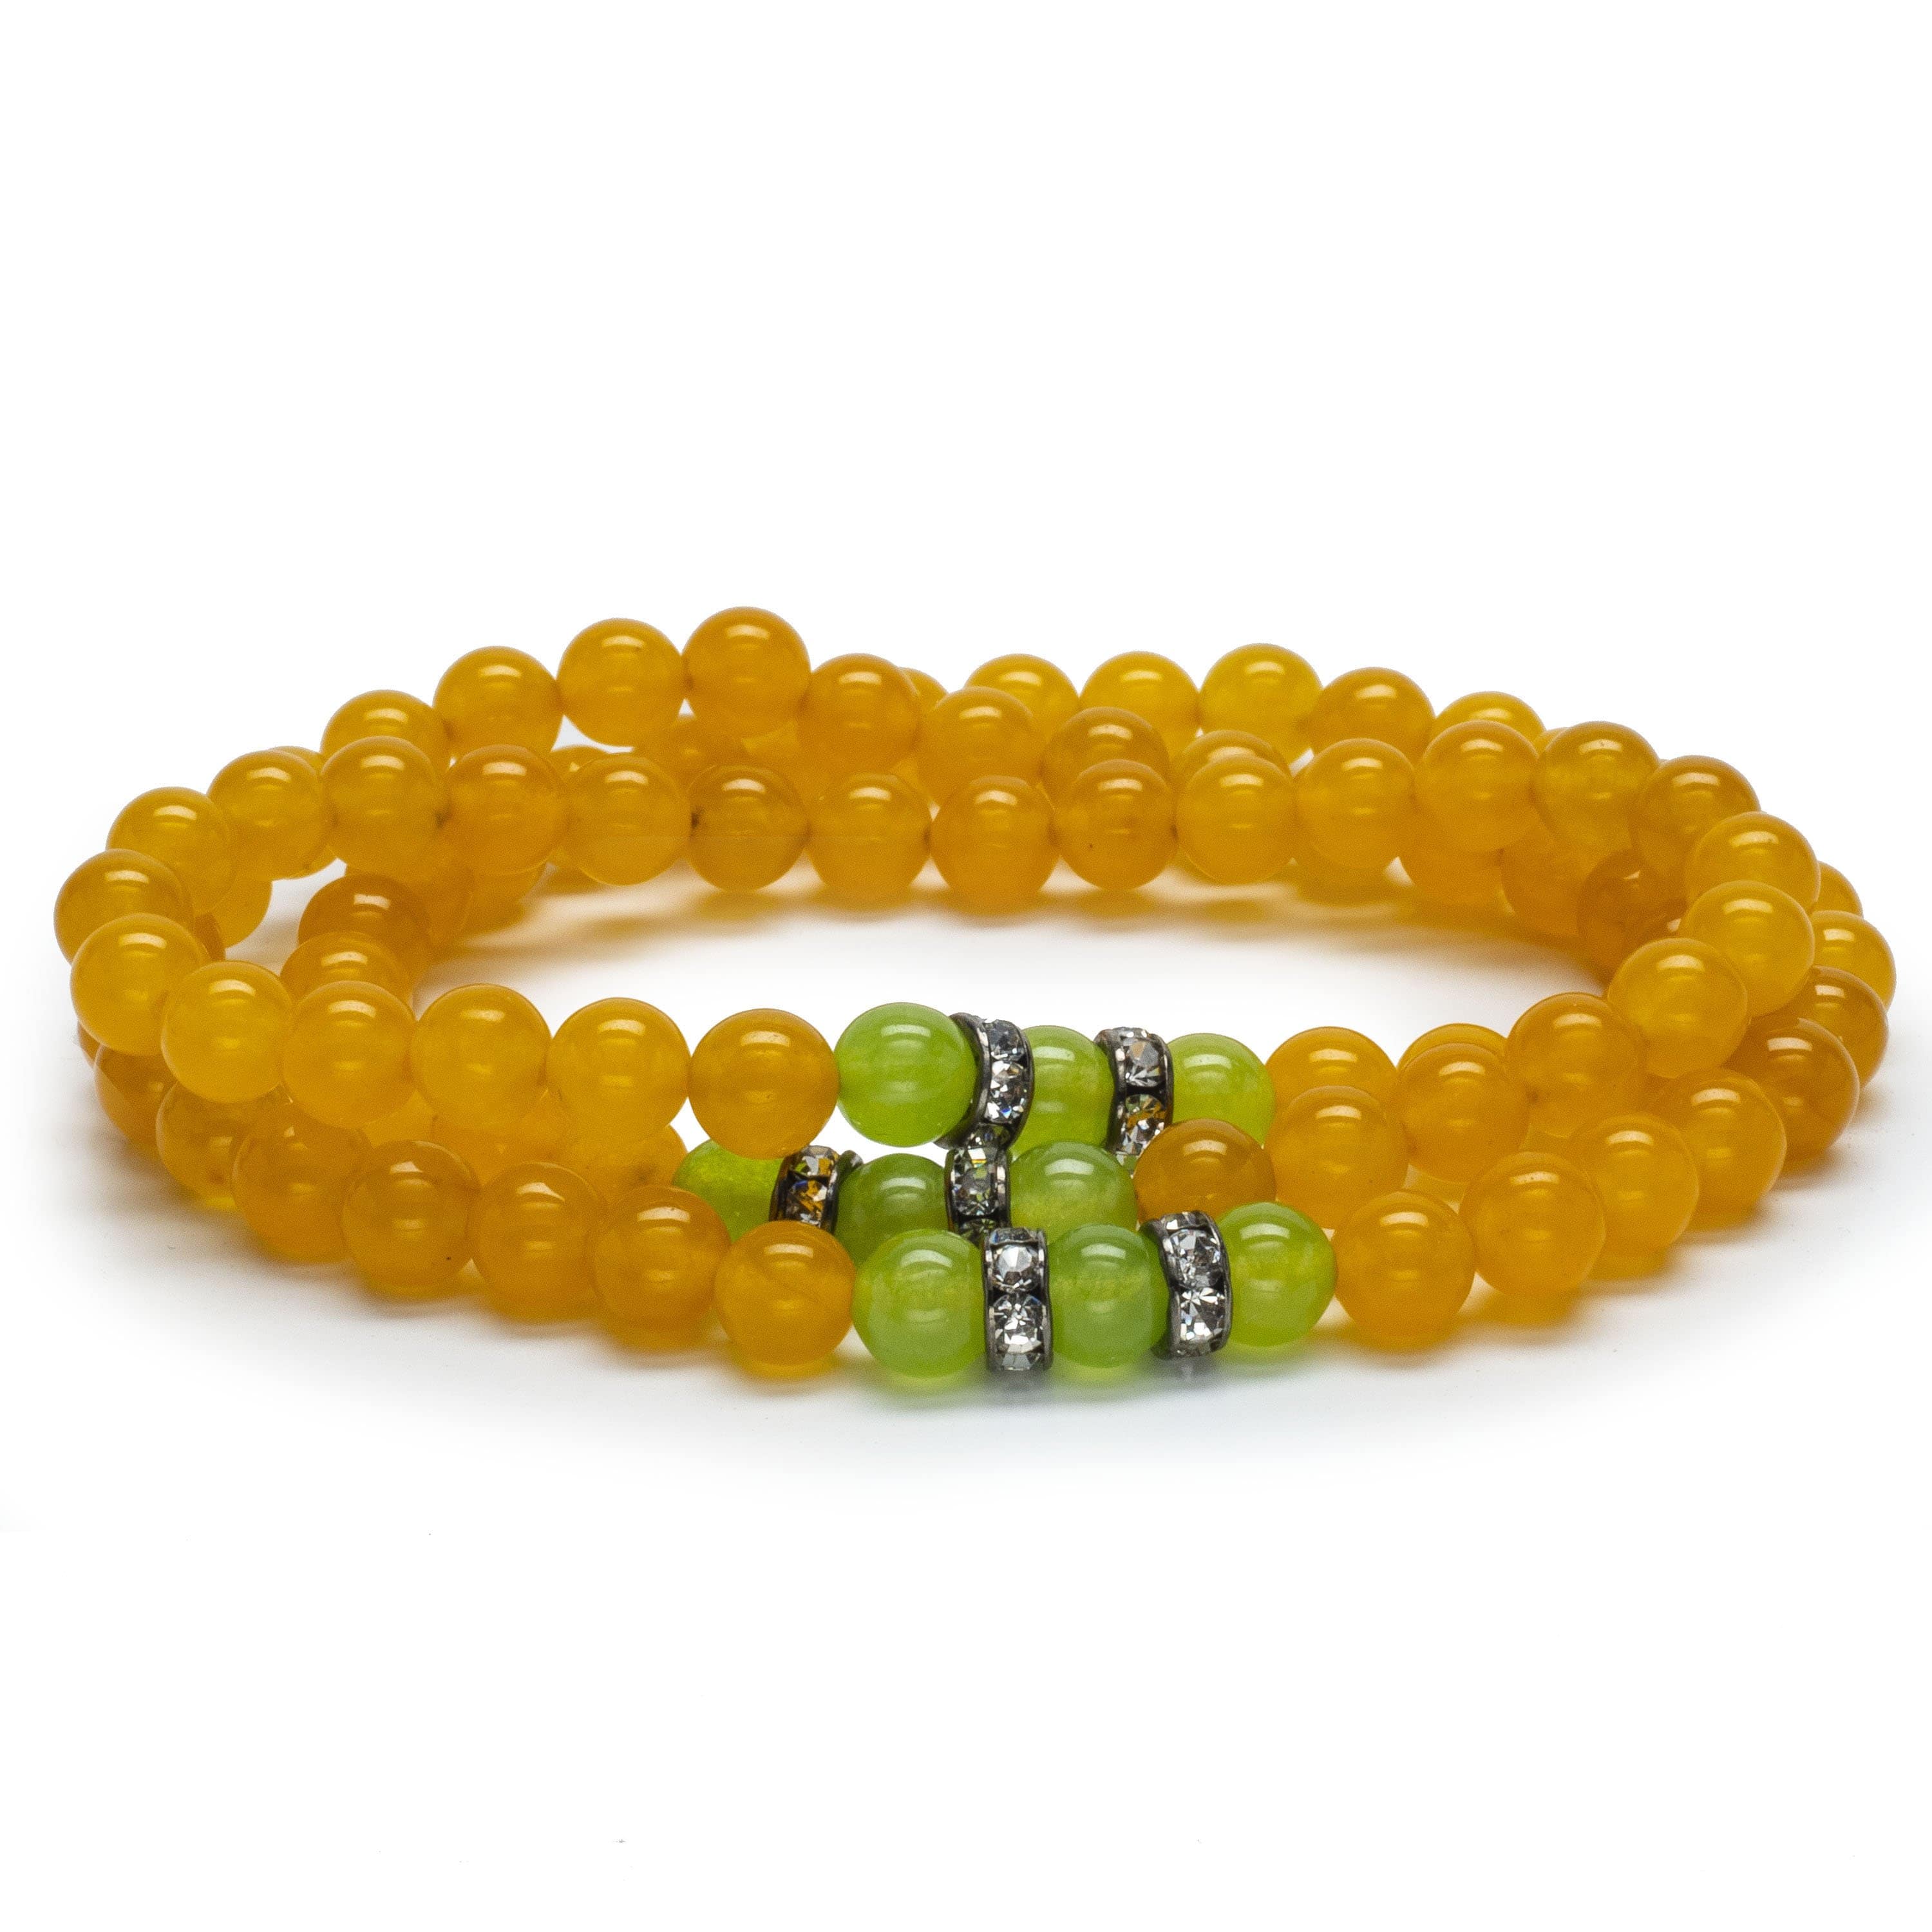 Kalifano Gemstone Bracelets Yellow Agate 6mm Beads with Green Agate and Silver Crystal Accent Beads Triple Wrap Elastic Gemstone Bracelet WHITE-BGI3-064